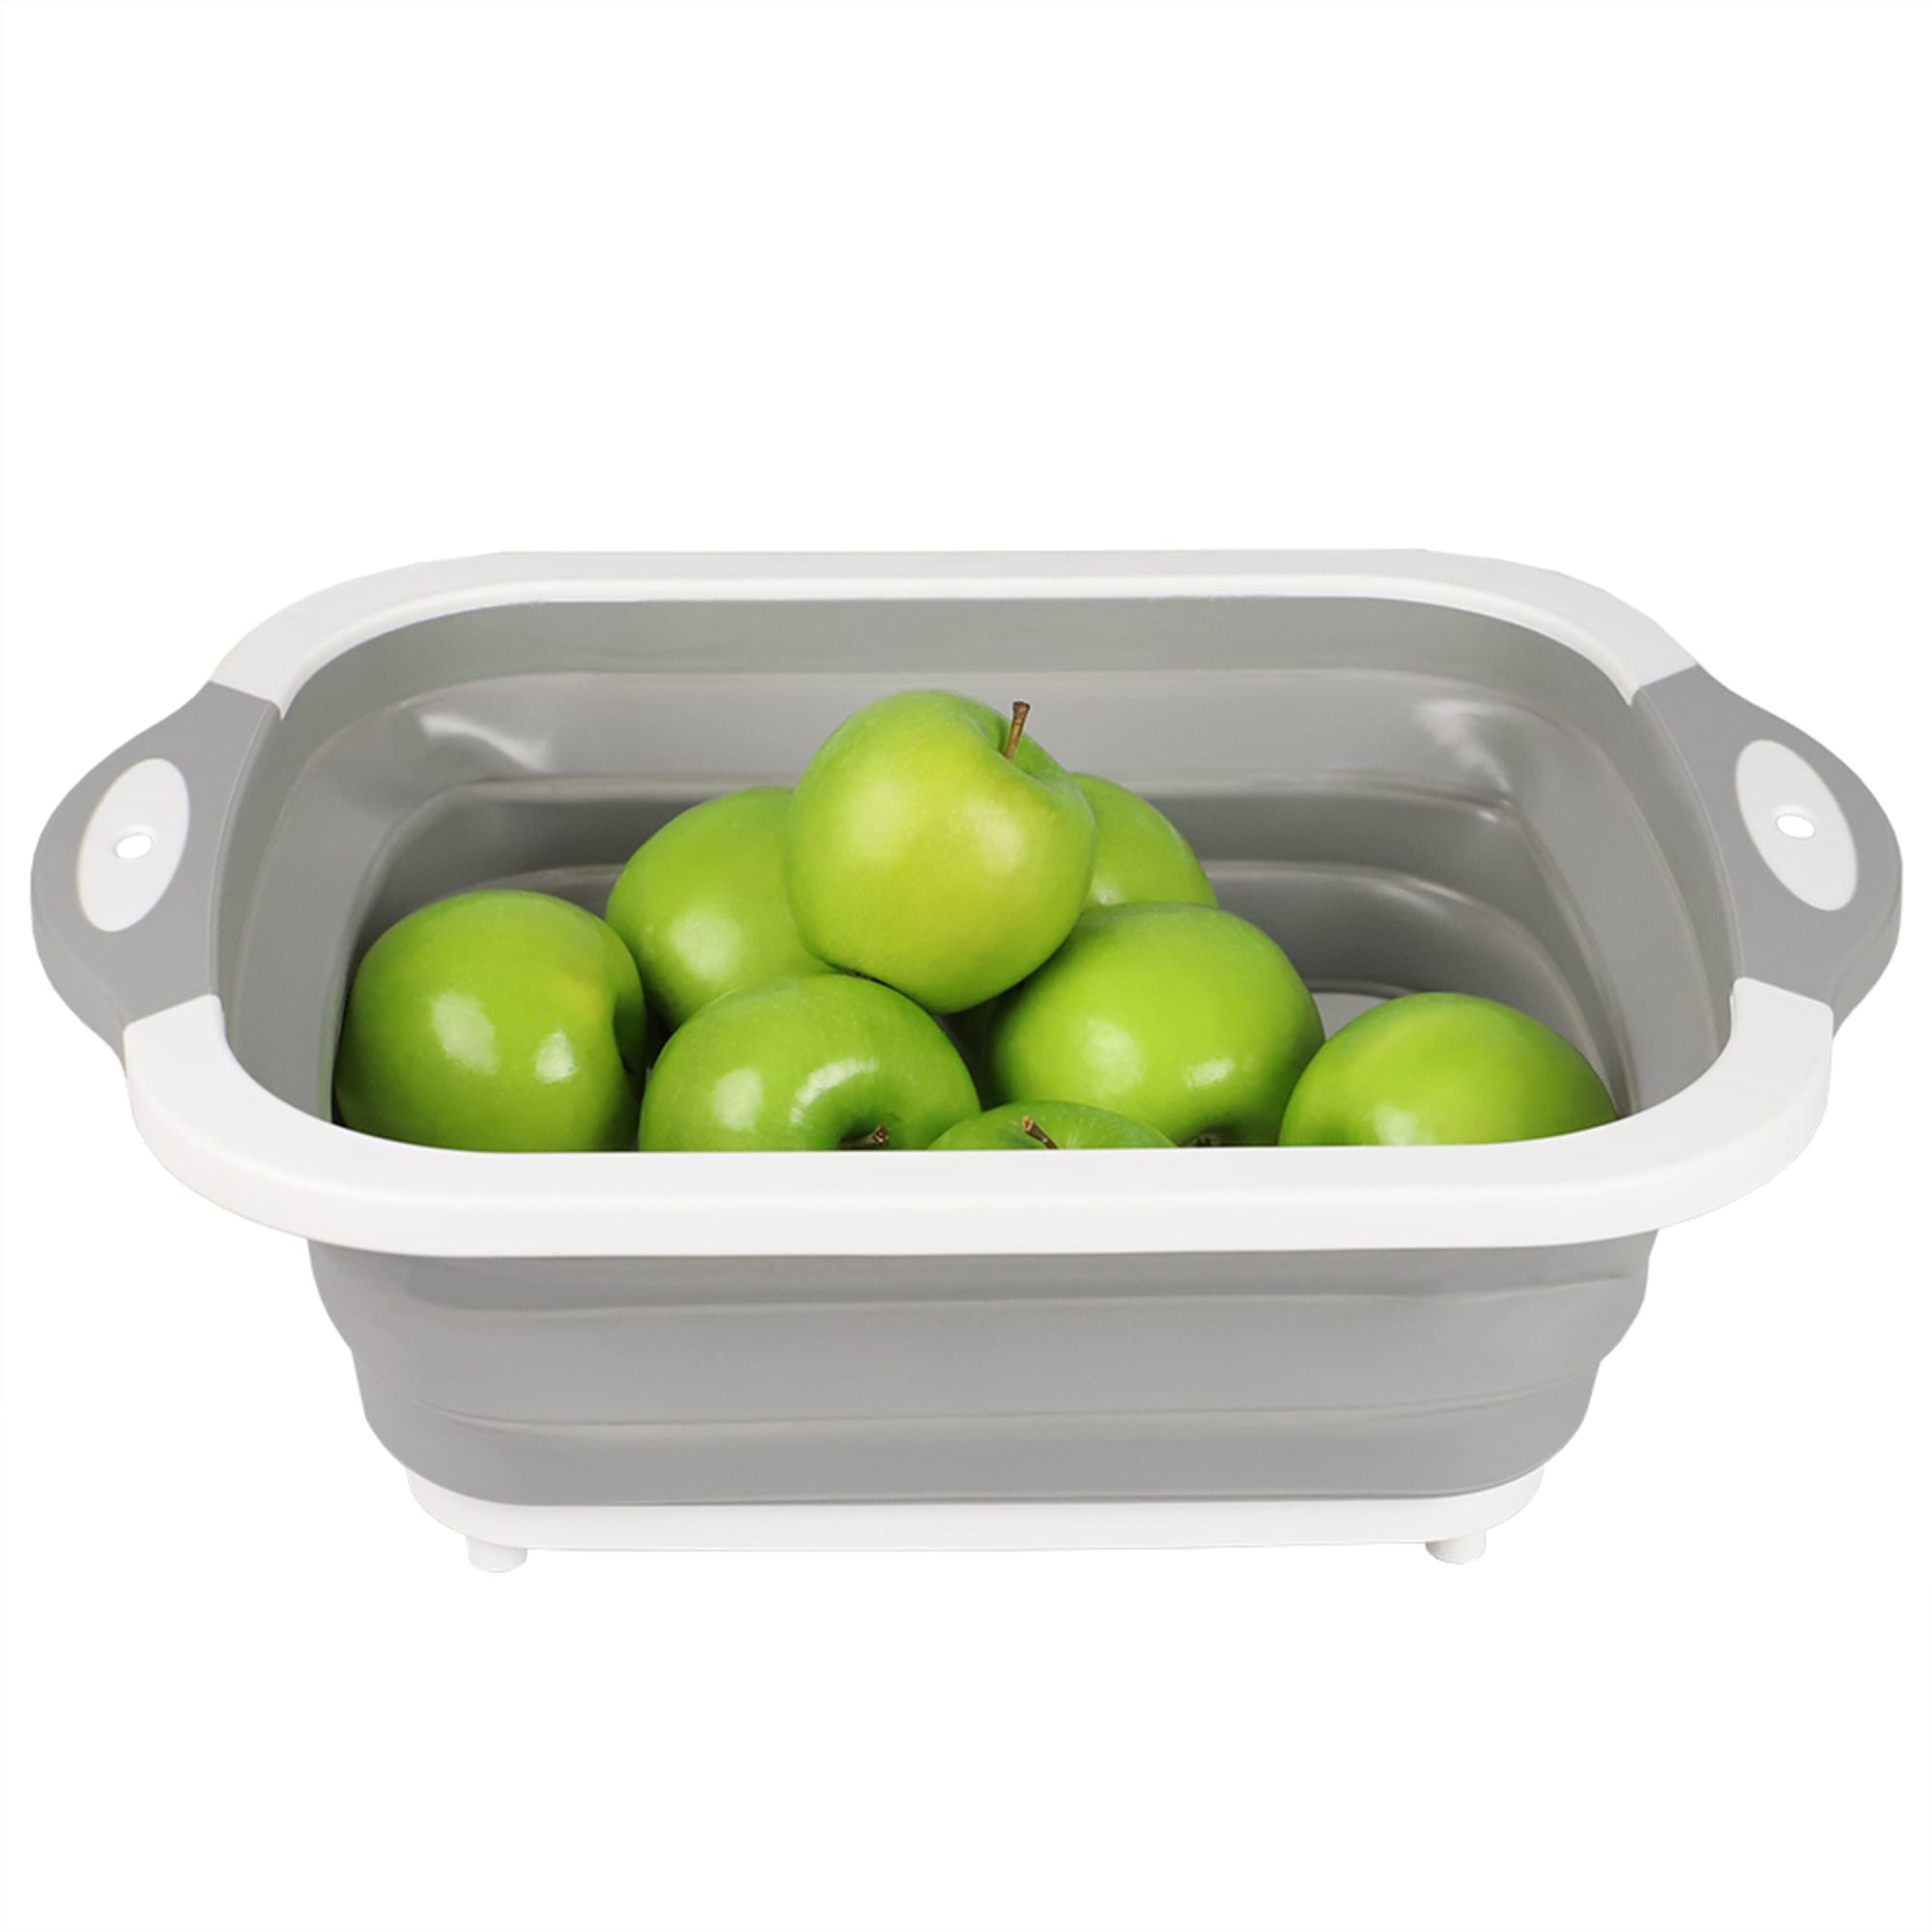 Home Basics 3-in-1 Collapsible Basket Cutting Board Strainer $6.00 EACH, CASE PACK OF 12